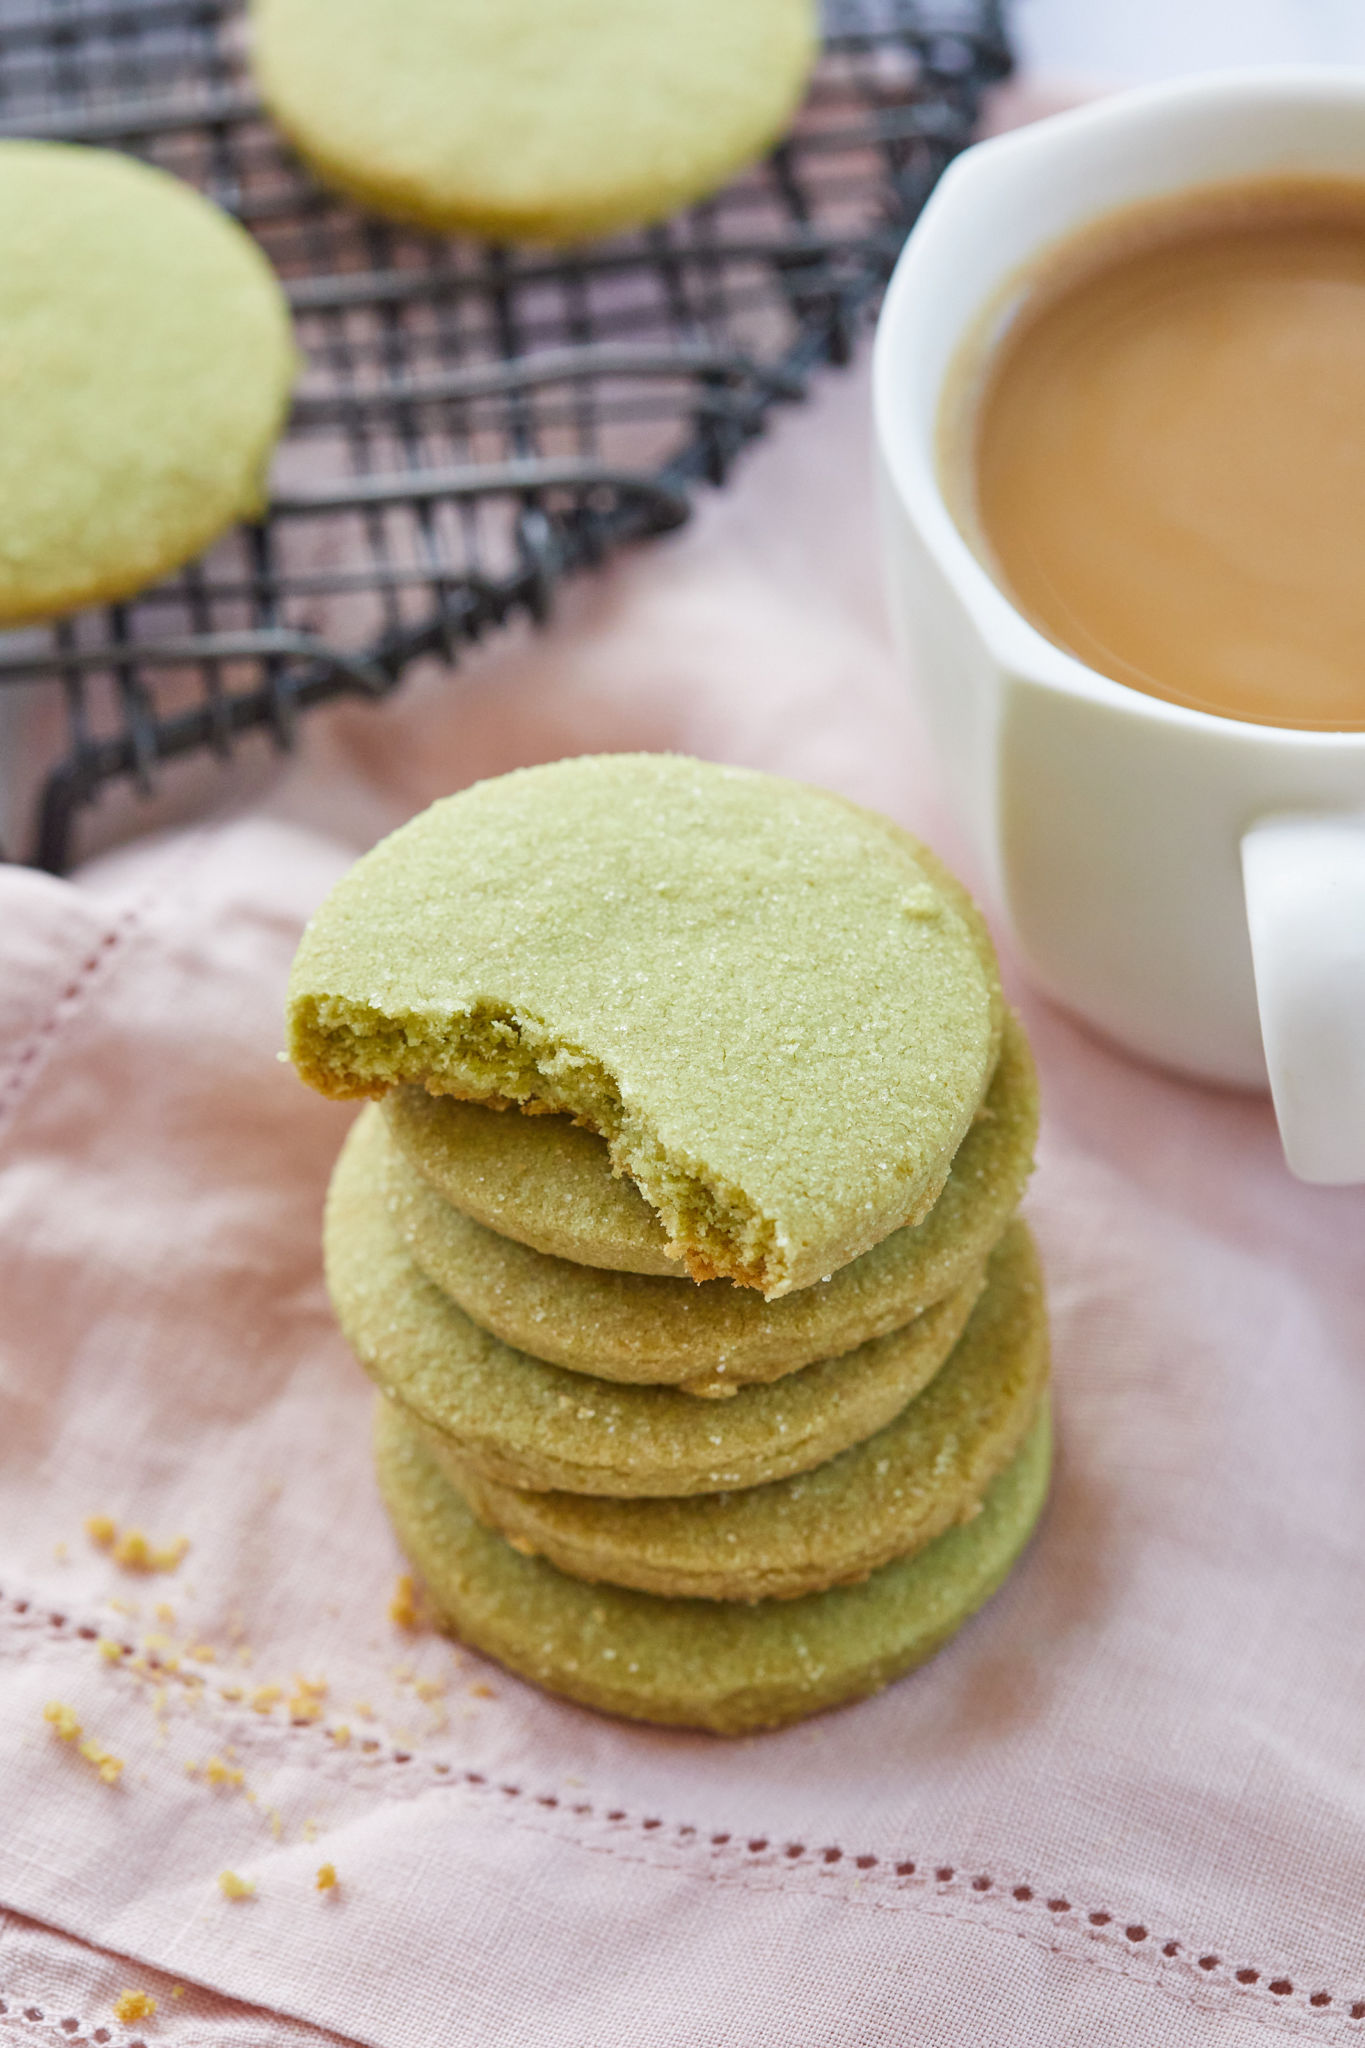 A matcha shortbread cookie with a bite taken out of it